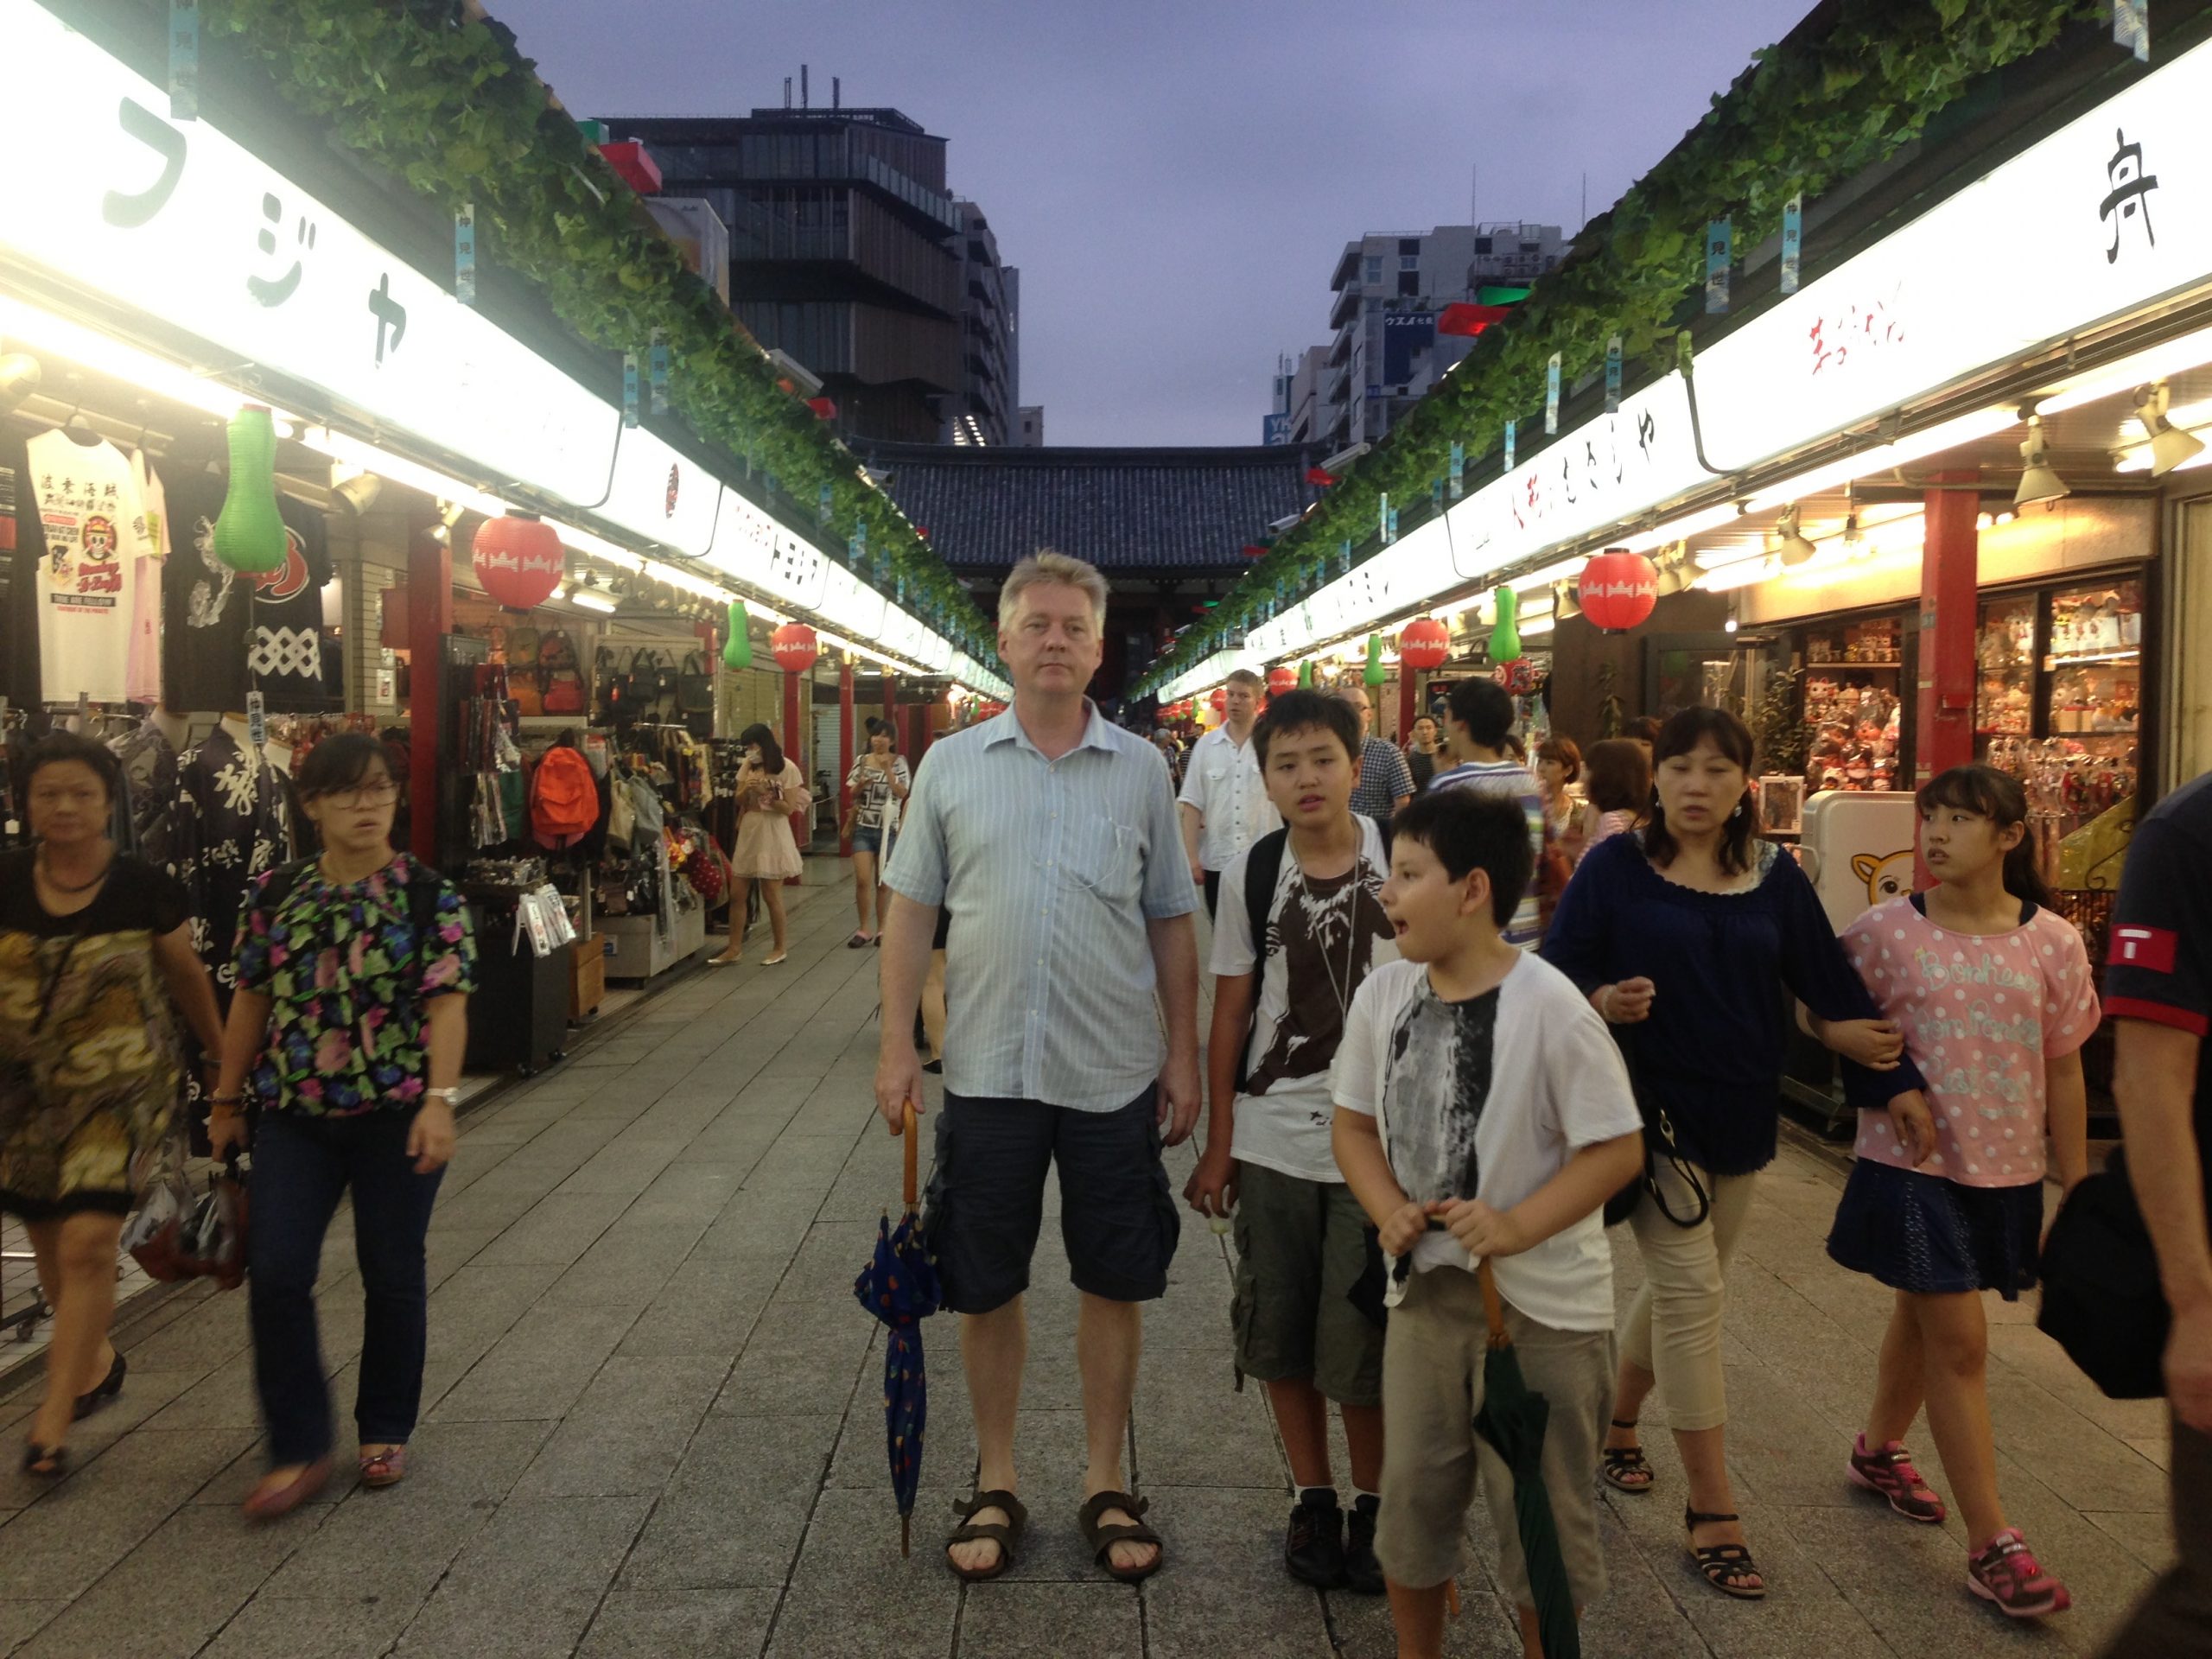 Heese and his sons Takeru and Naoriki in a Tsukuba marketplace in Japan. 